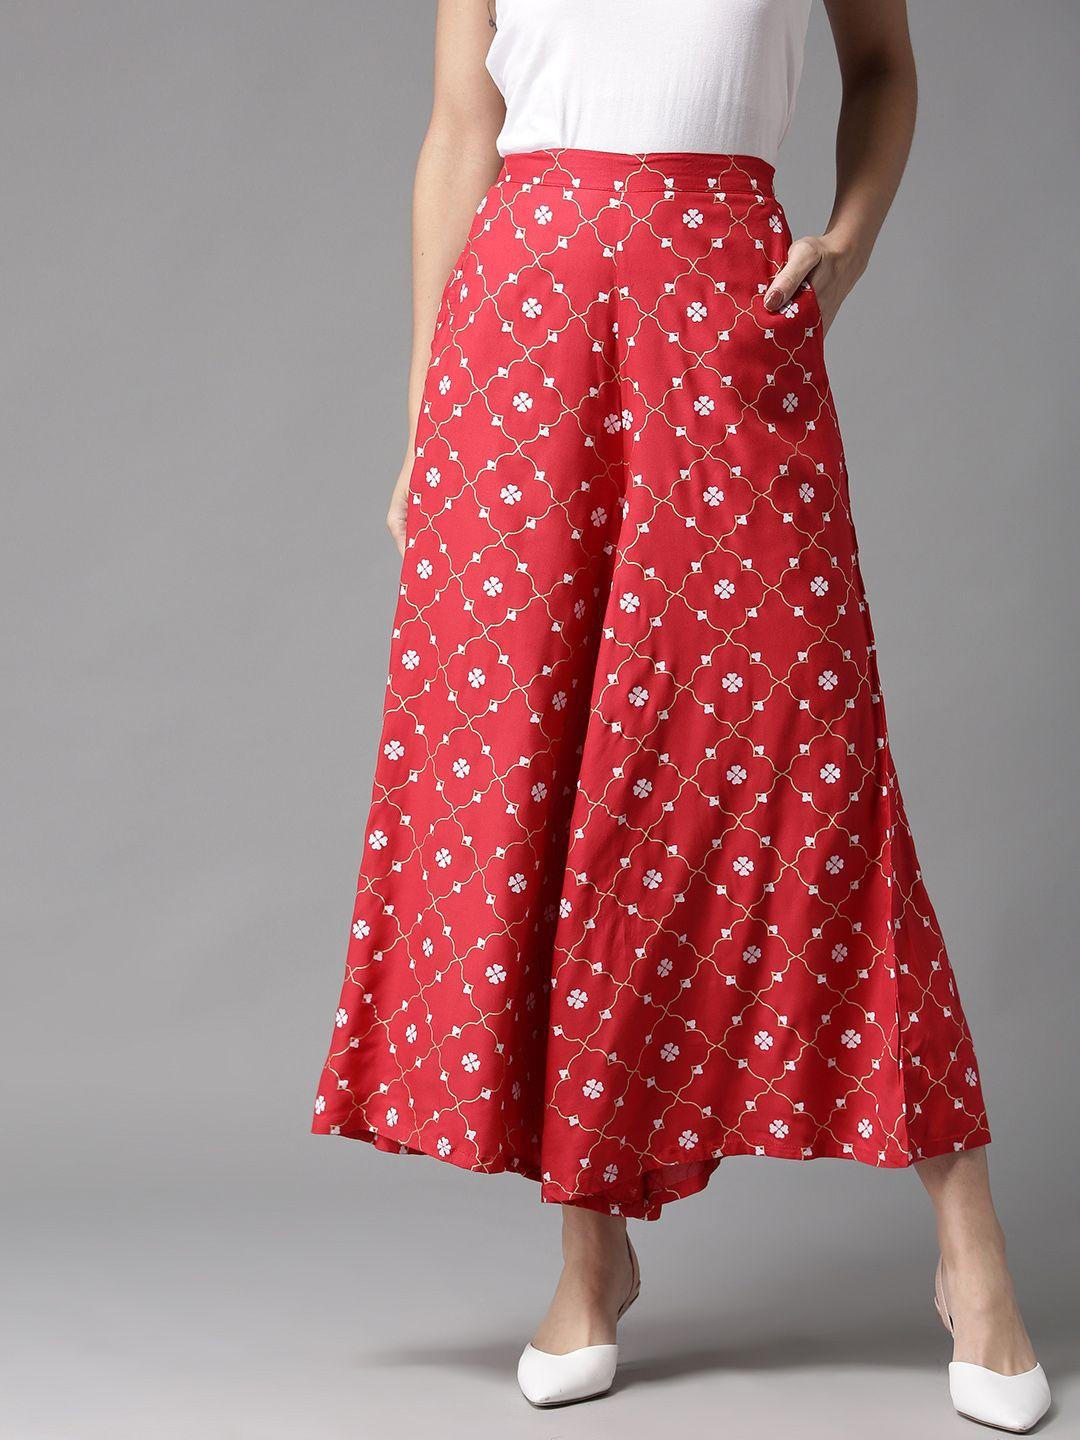 here&now women red & white printed wide leg palazzos